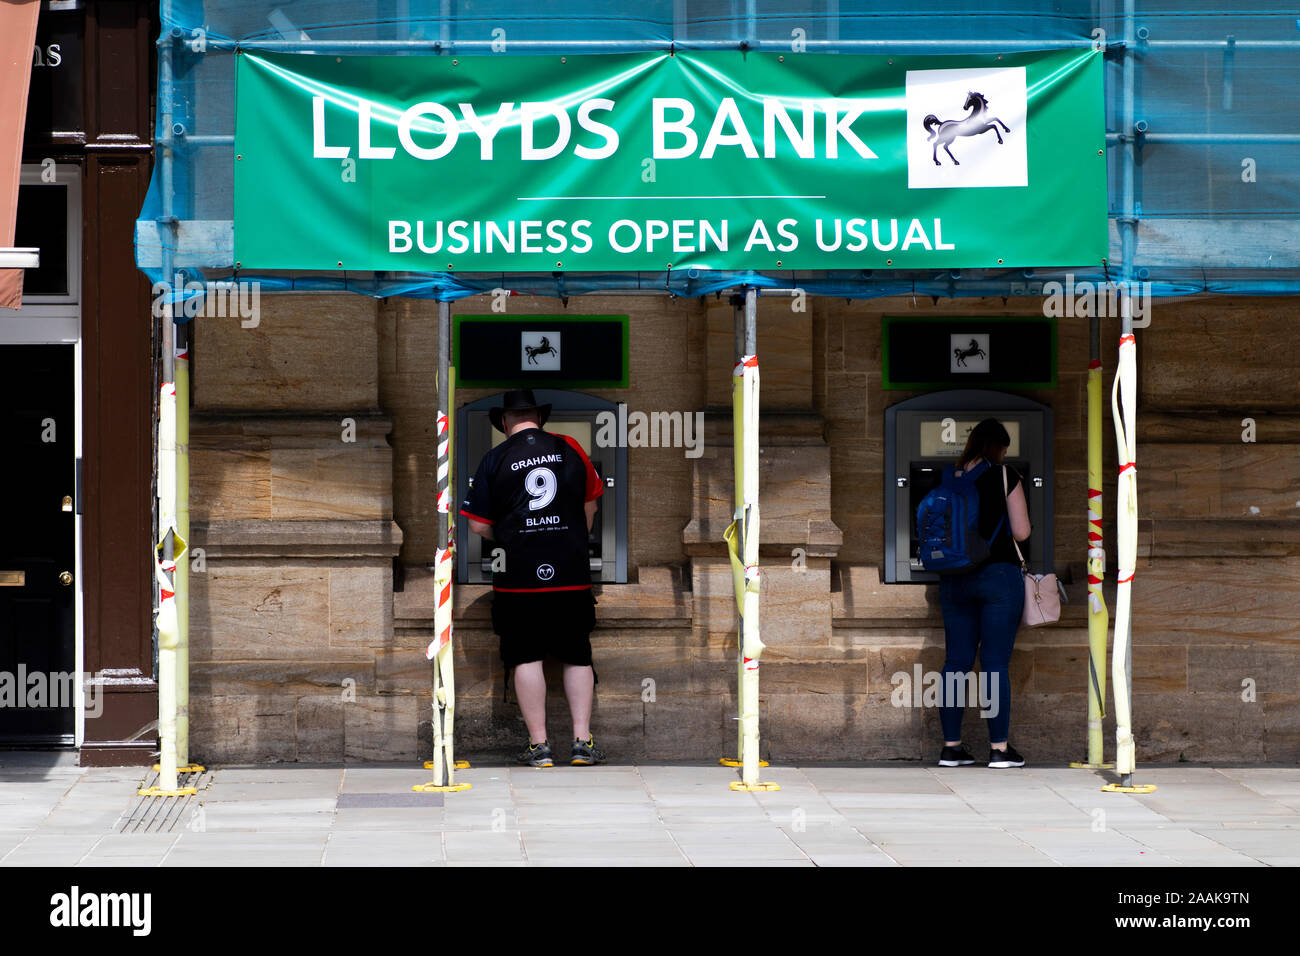 people withdrawing money from Lloyds cash point machines, British retail and commercial bank with branches across England and Wales Stock Photo